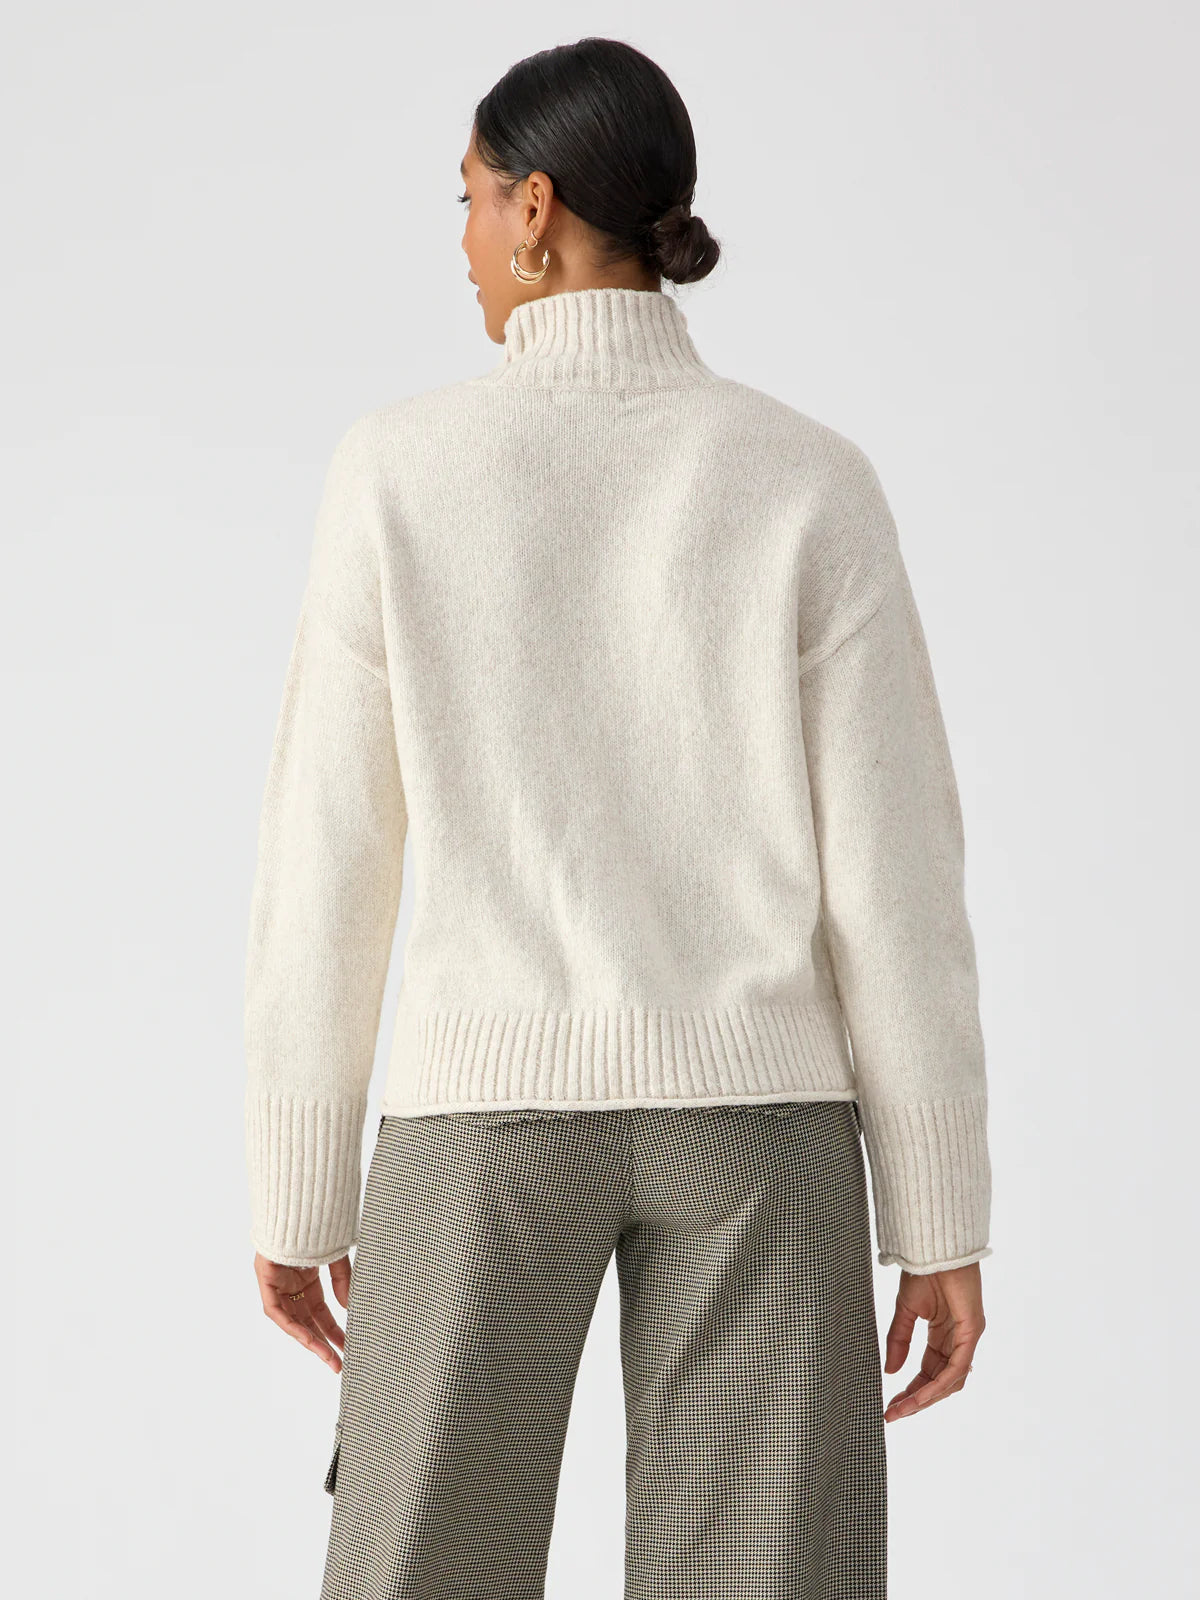 CABIN FEVER SWEATER - TOASTED MARSHMALLOW